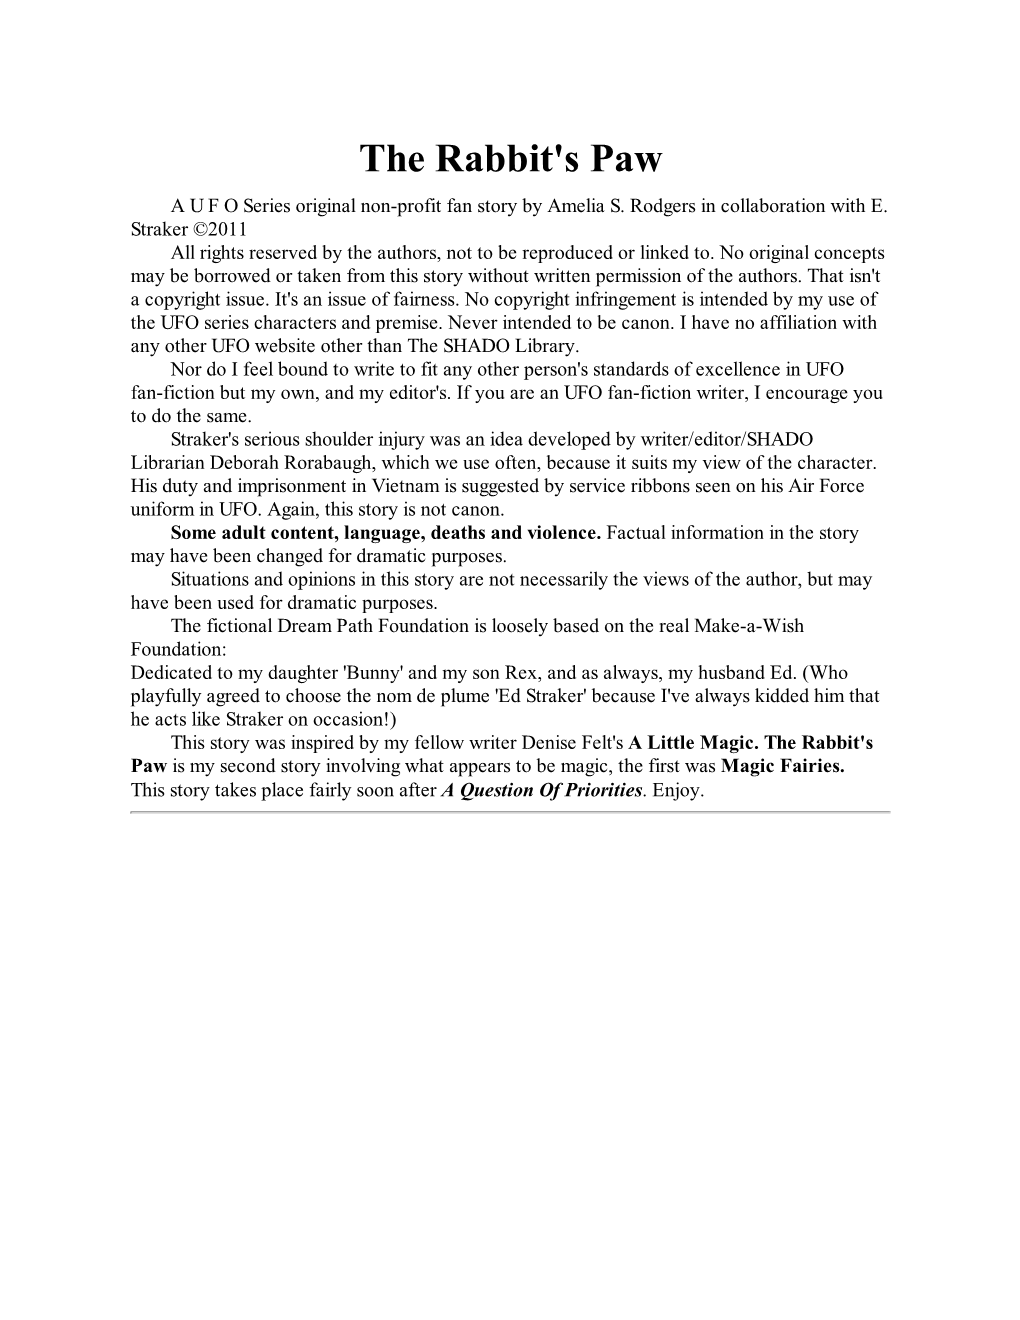 The Rabbit's Paw by Amelia Rodgers